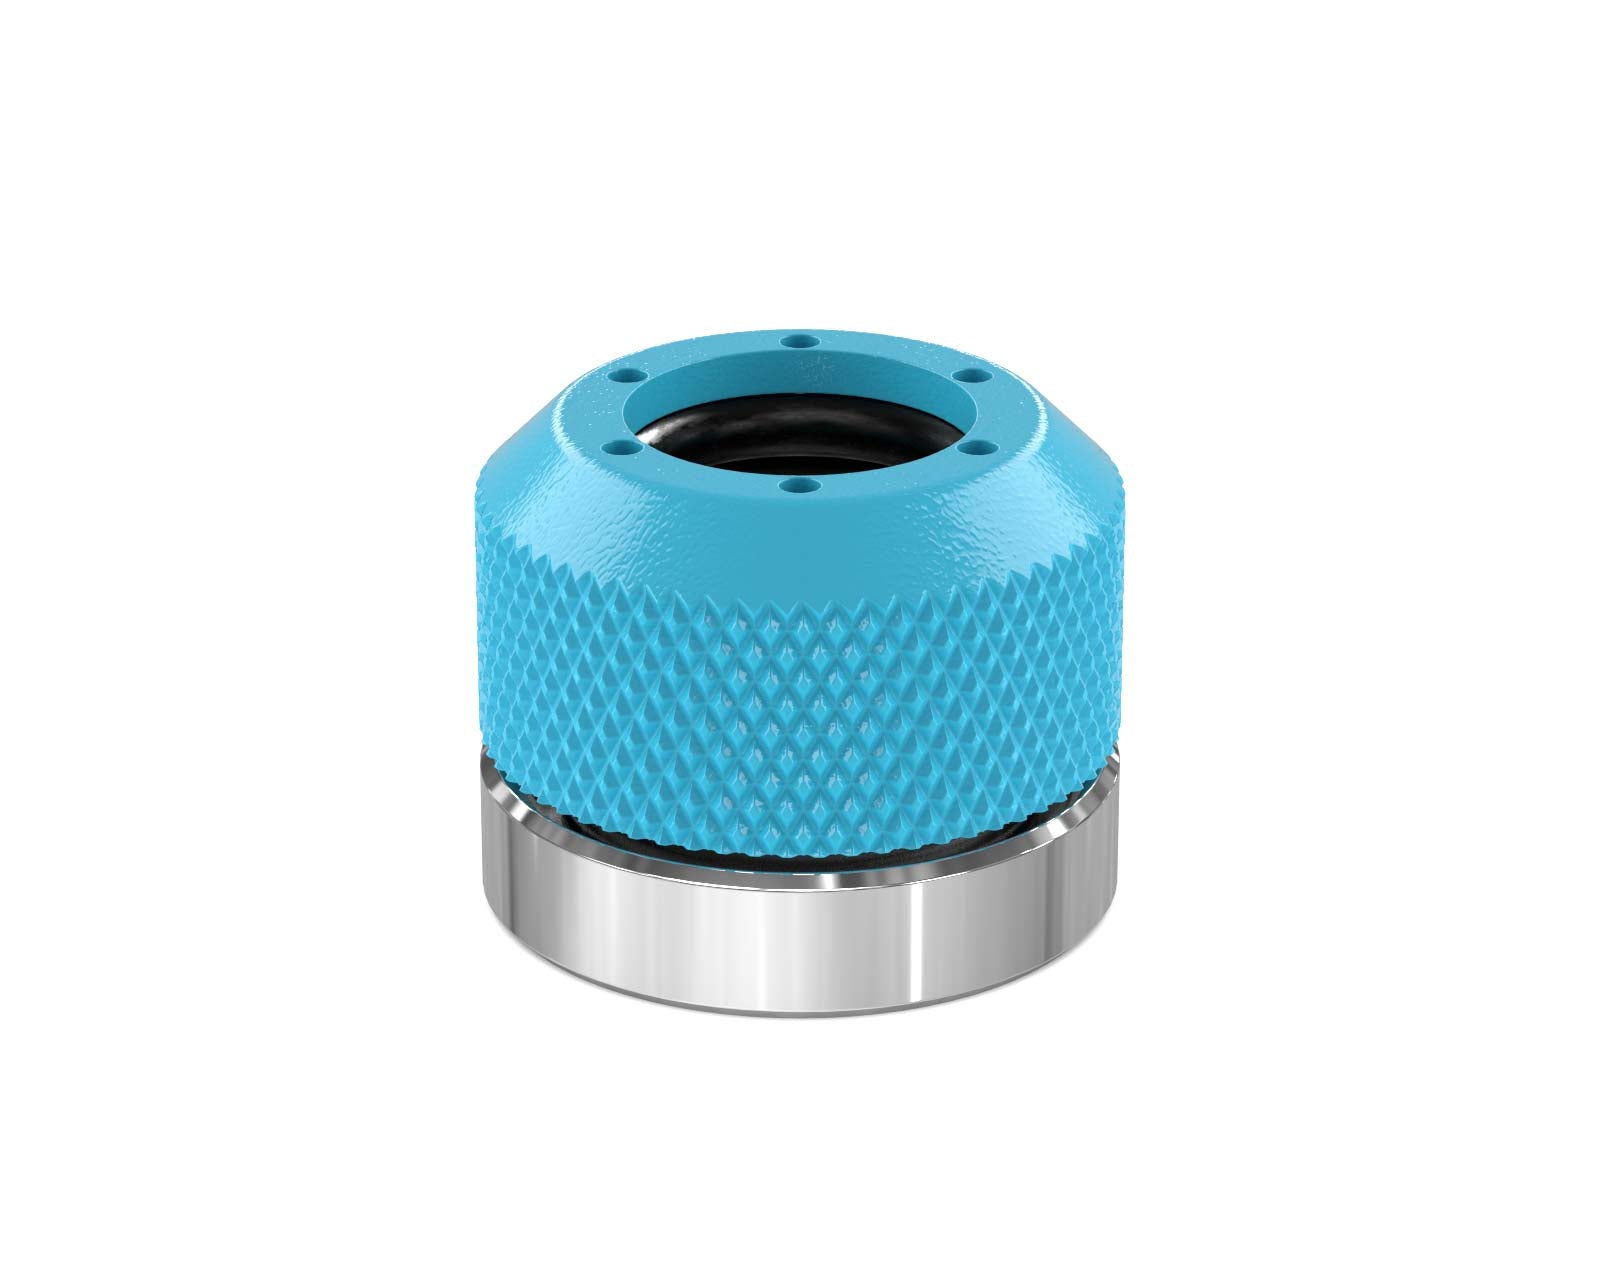 PrimoChill 1/2in. Rigid RevolverSX Series Coupler G 1/4 Fitting - PrimoChill - KEEPING IT COOL Sky Blue